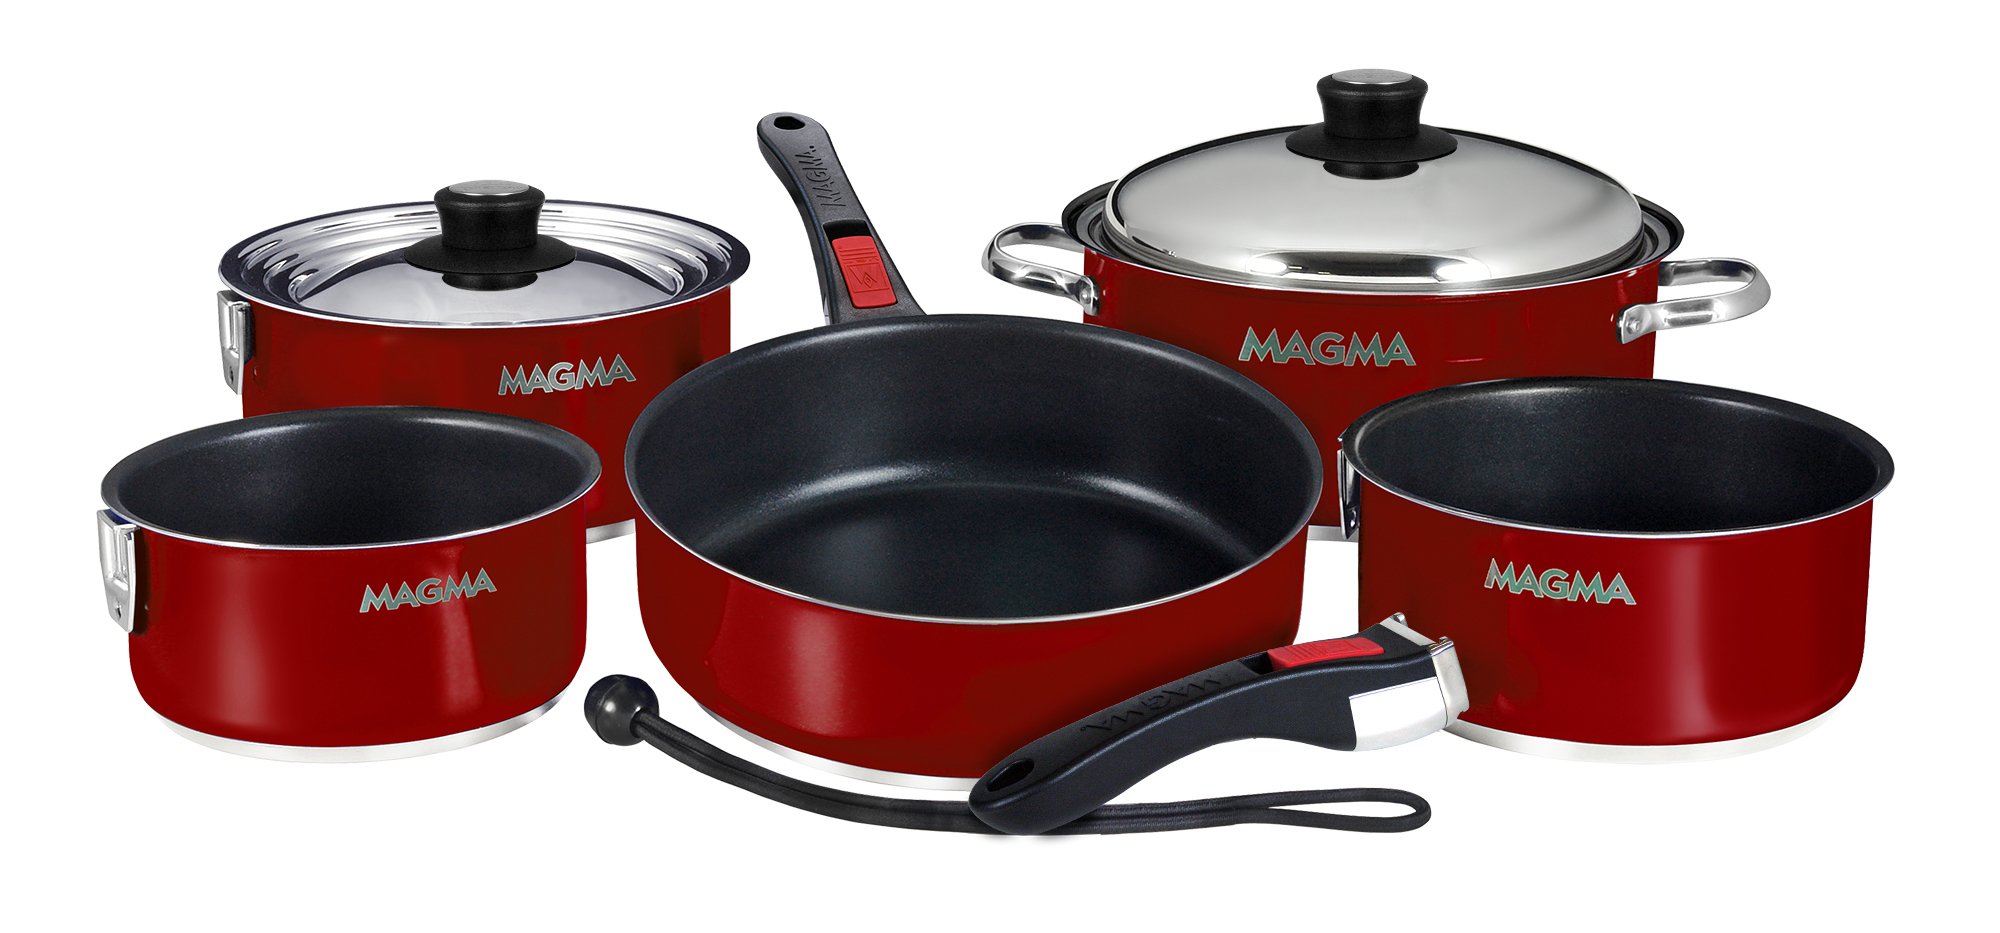 Magma Ceramica Non-Stick 10 Piece Induction Compatible Nesting Cookware Set, Red